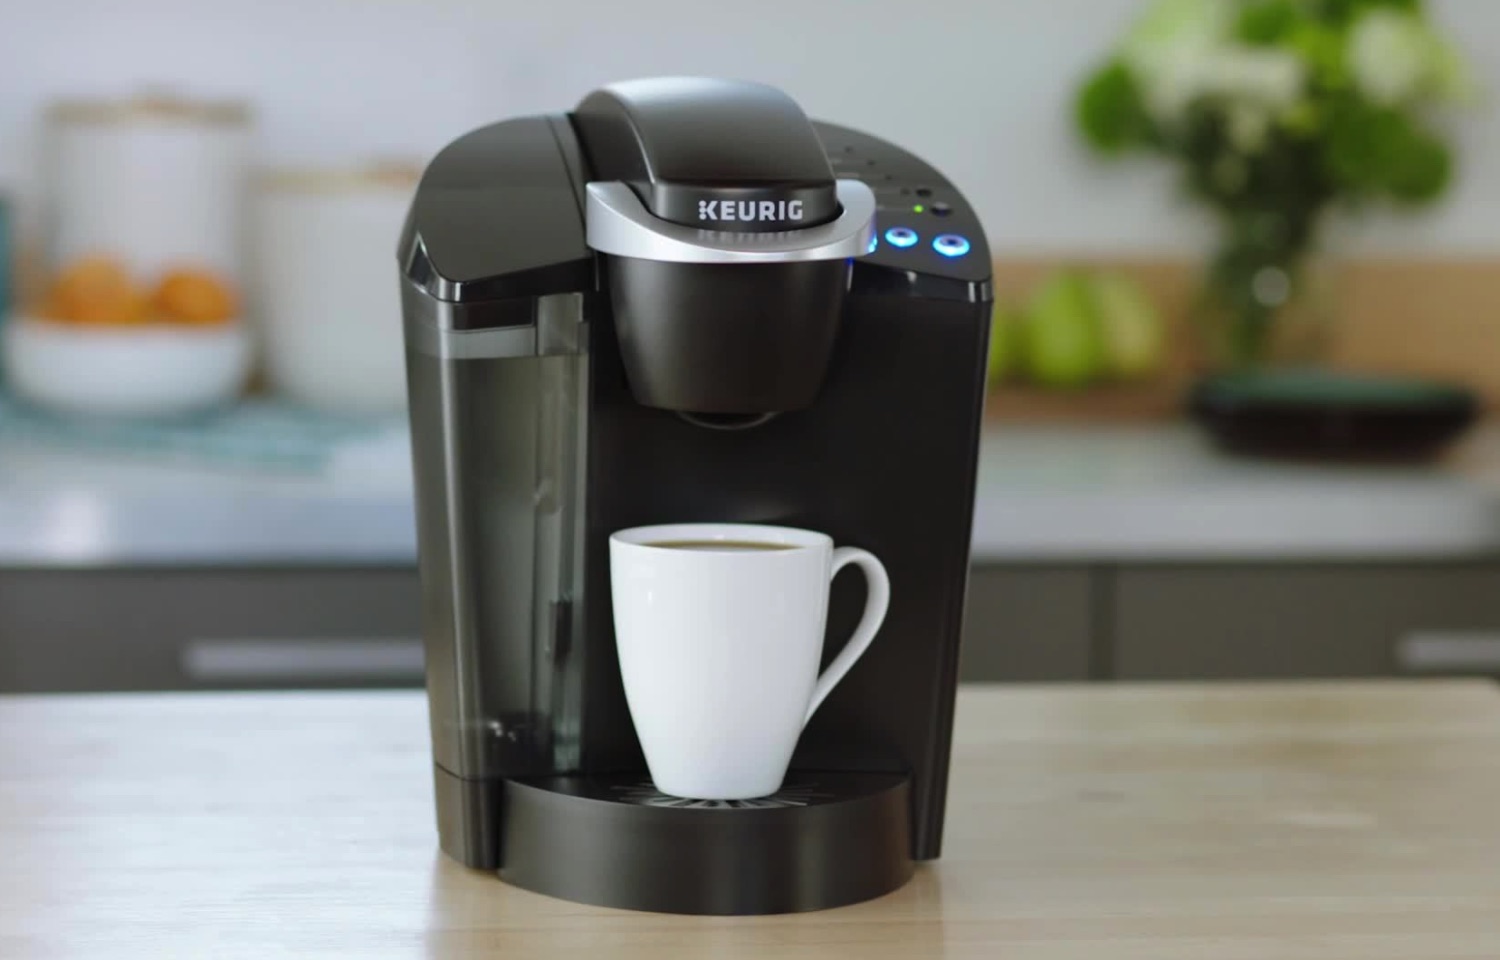 The Keurig K-Classic on a counter.